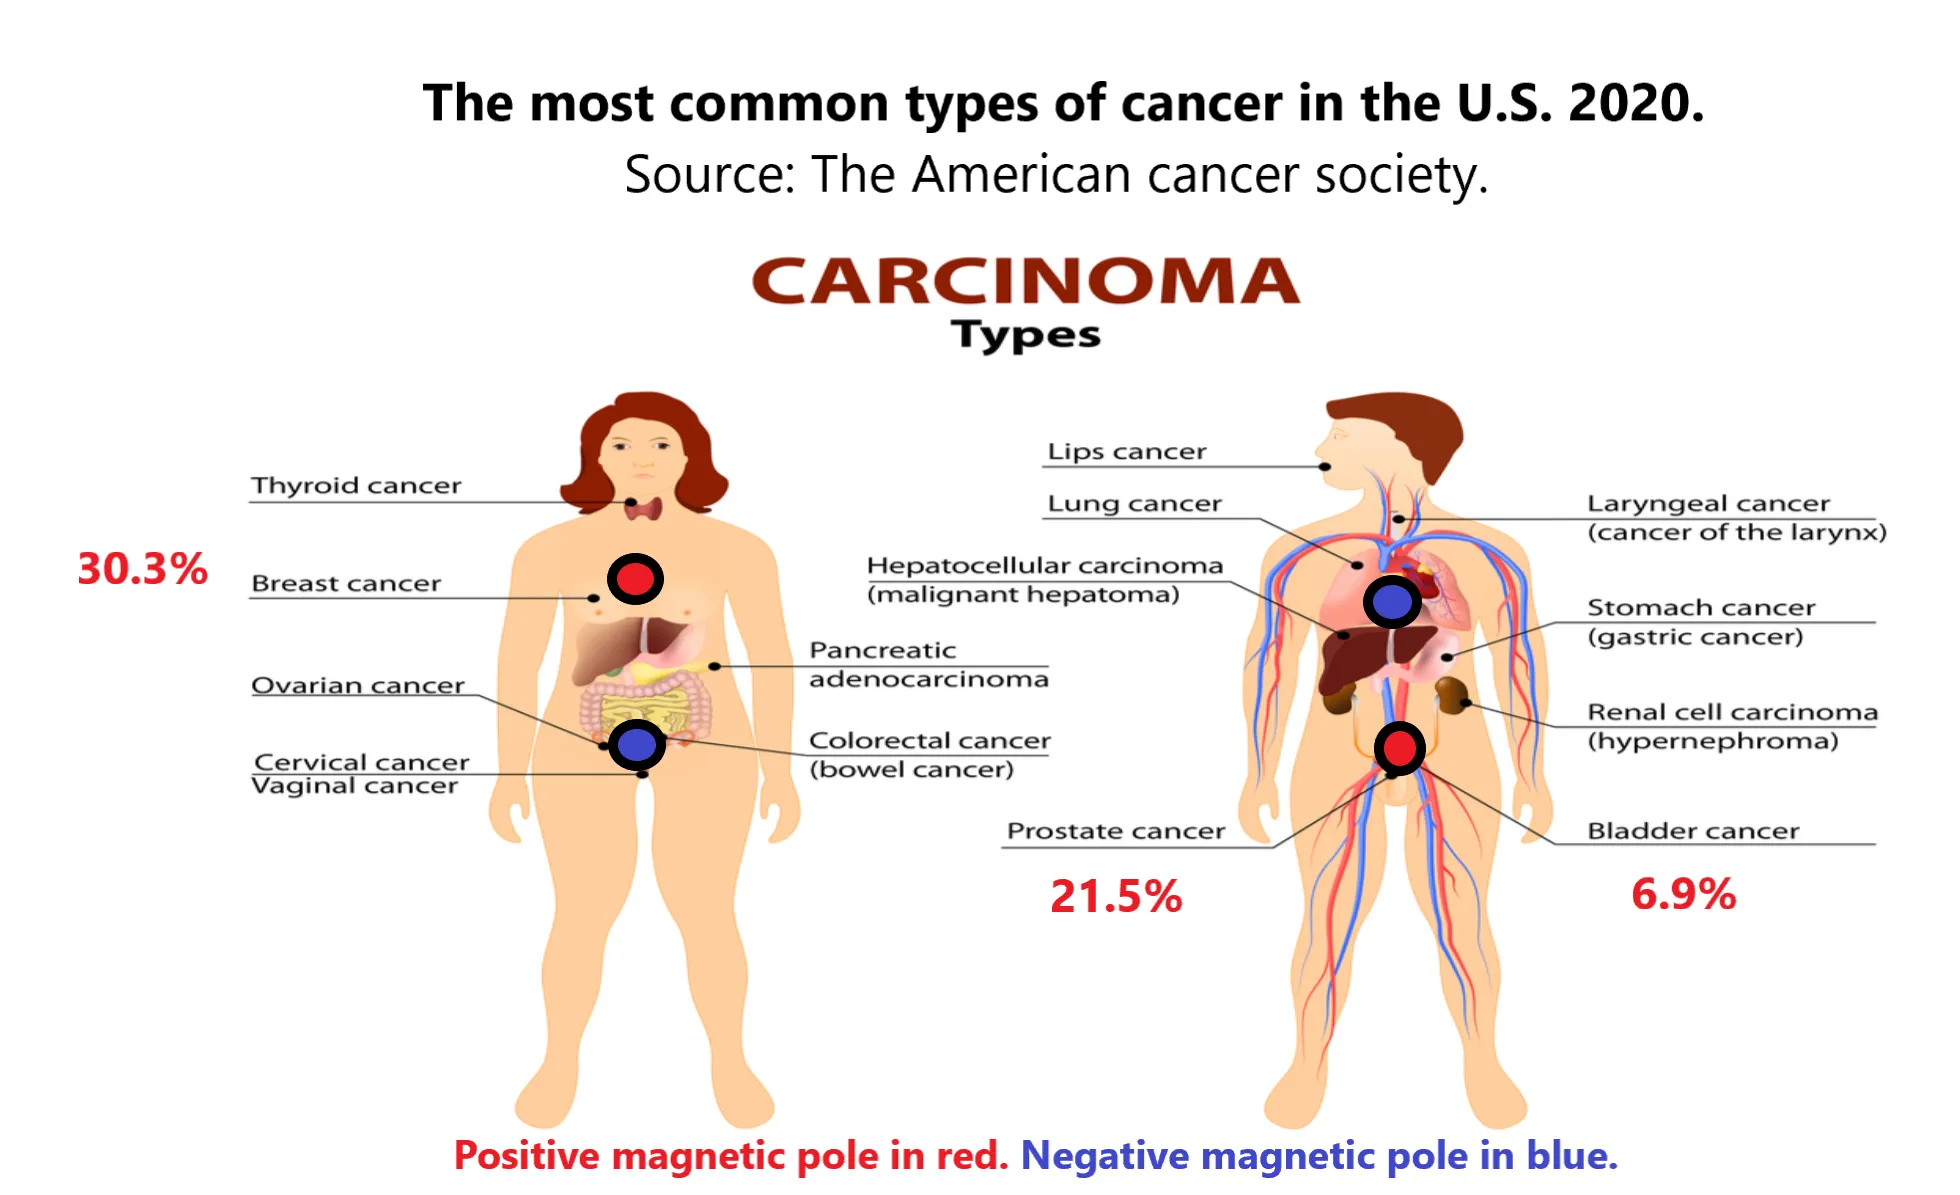 The most common types of cancer in the U.S. 2020.